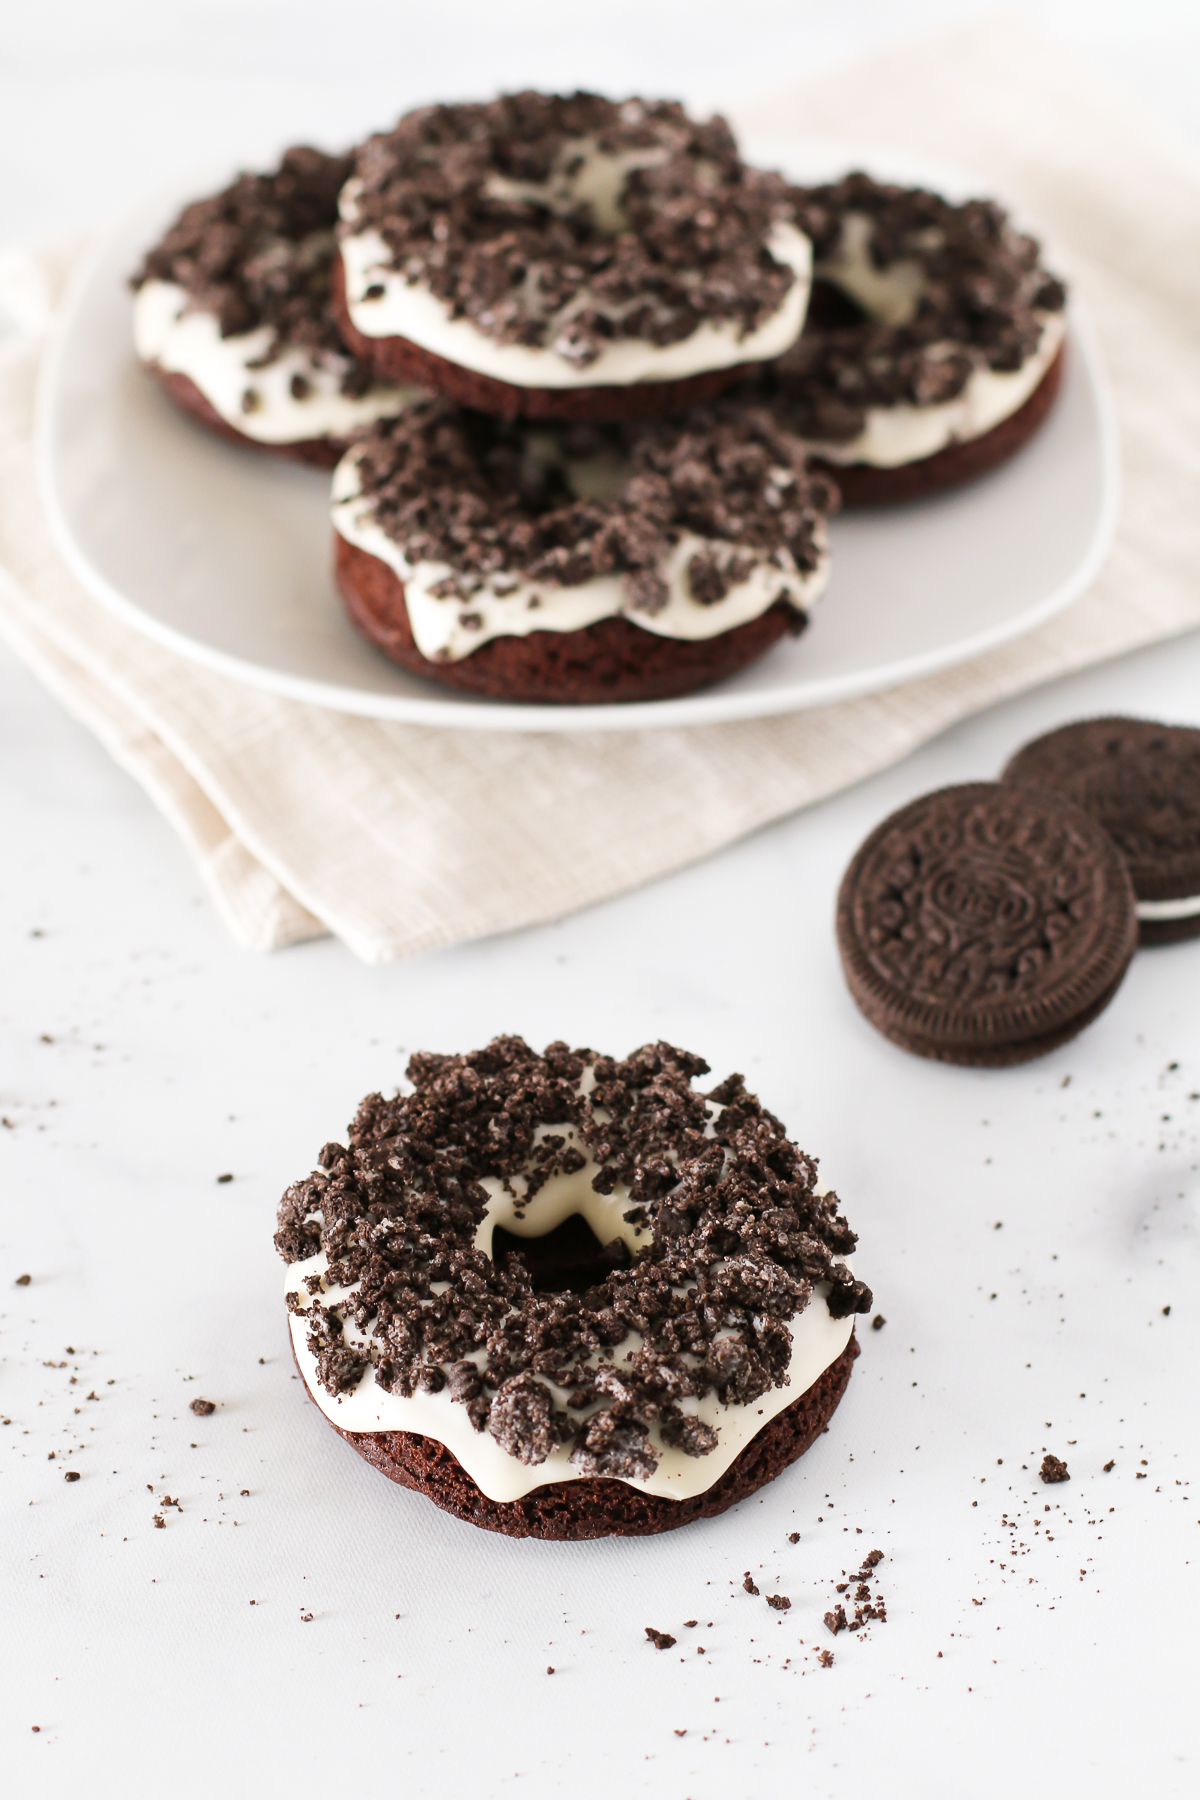 Gluten Free Vegan Cookies N’ Cream Donuts. These baked chocolate donuts have a simple vanilla glaze and are covered with lots of crushed Oreo cookies!